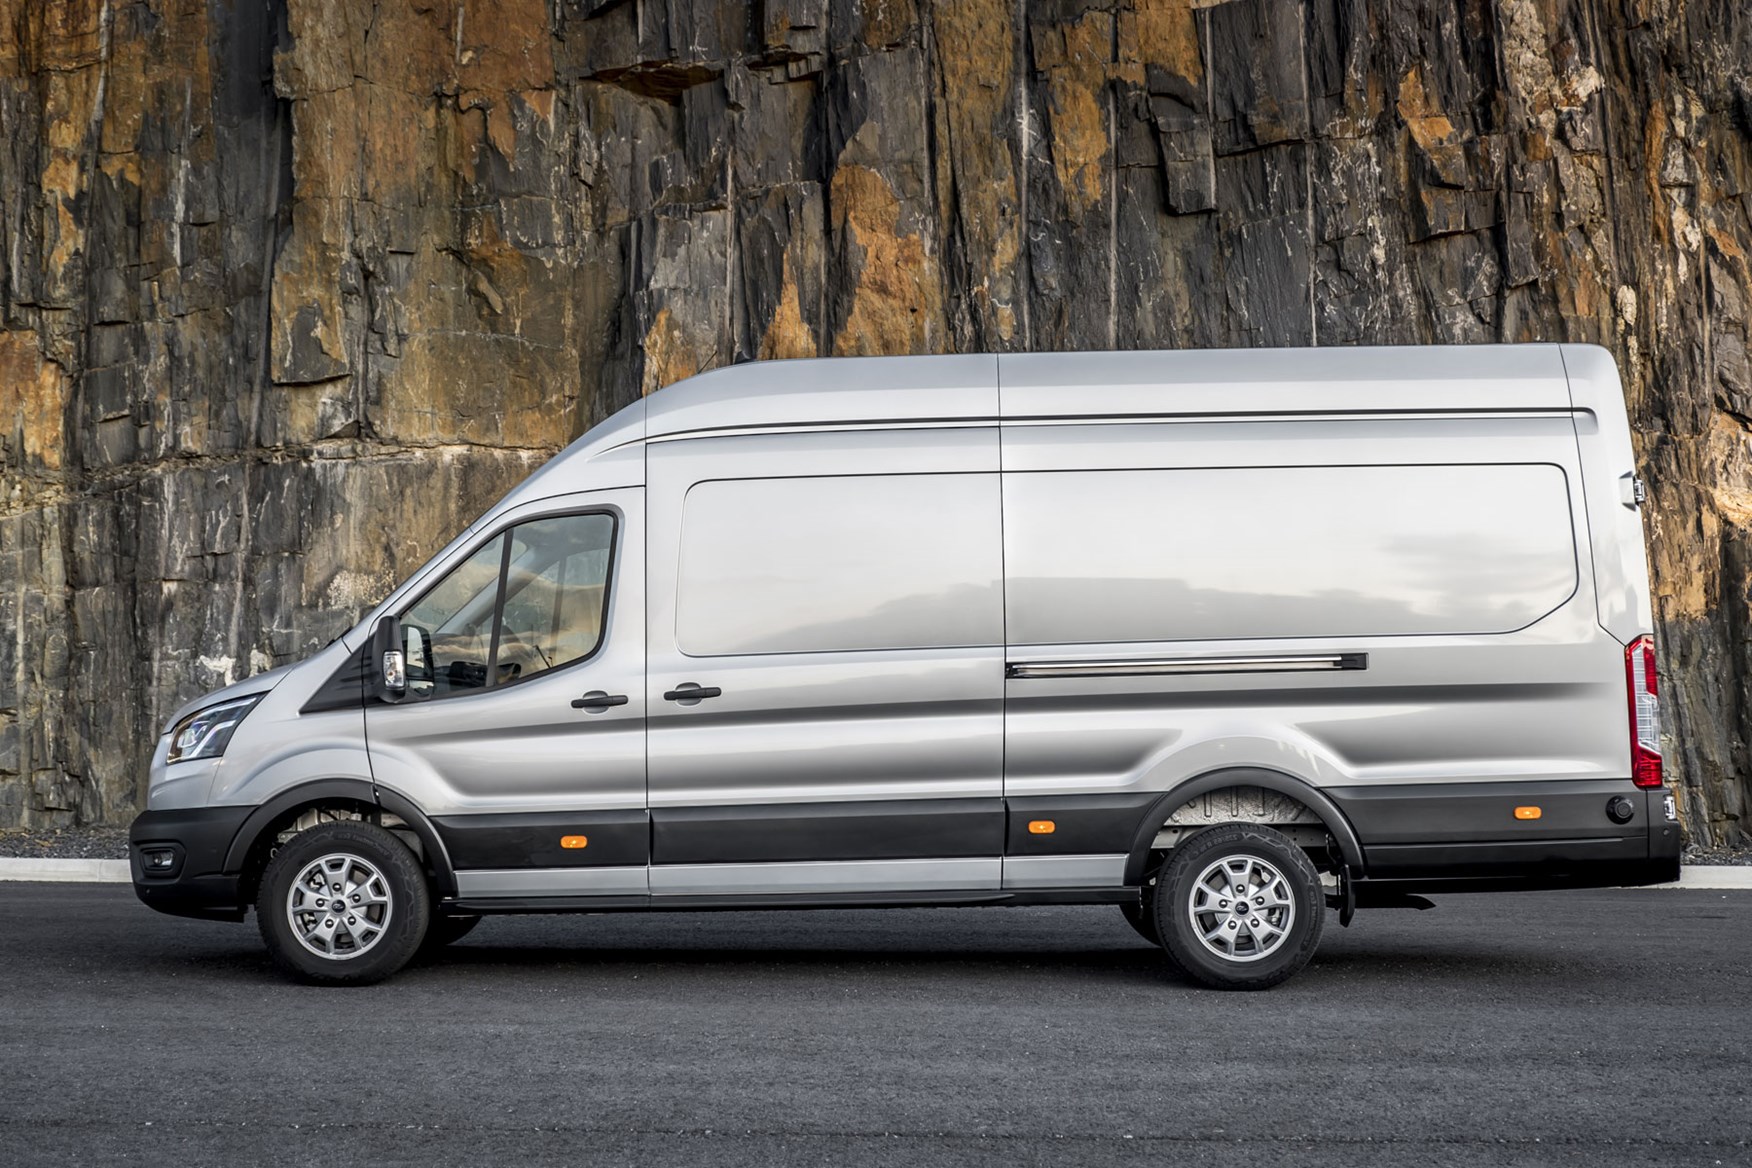 Ford Transit van dimensions, capacity, payload, volume, towing